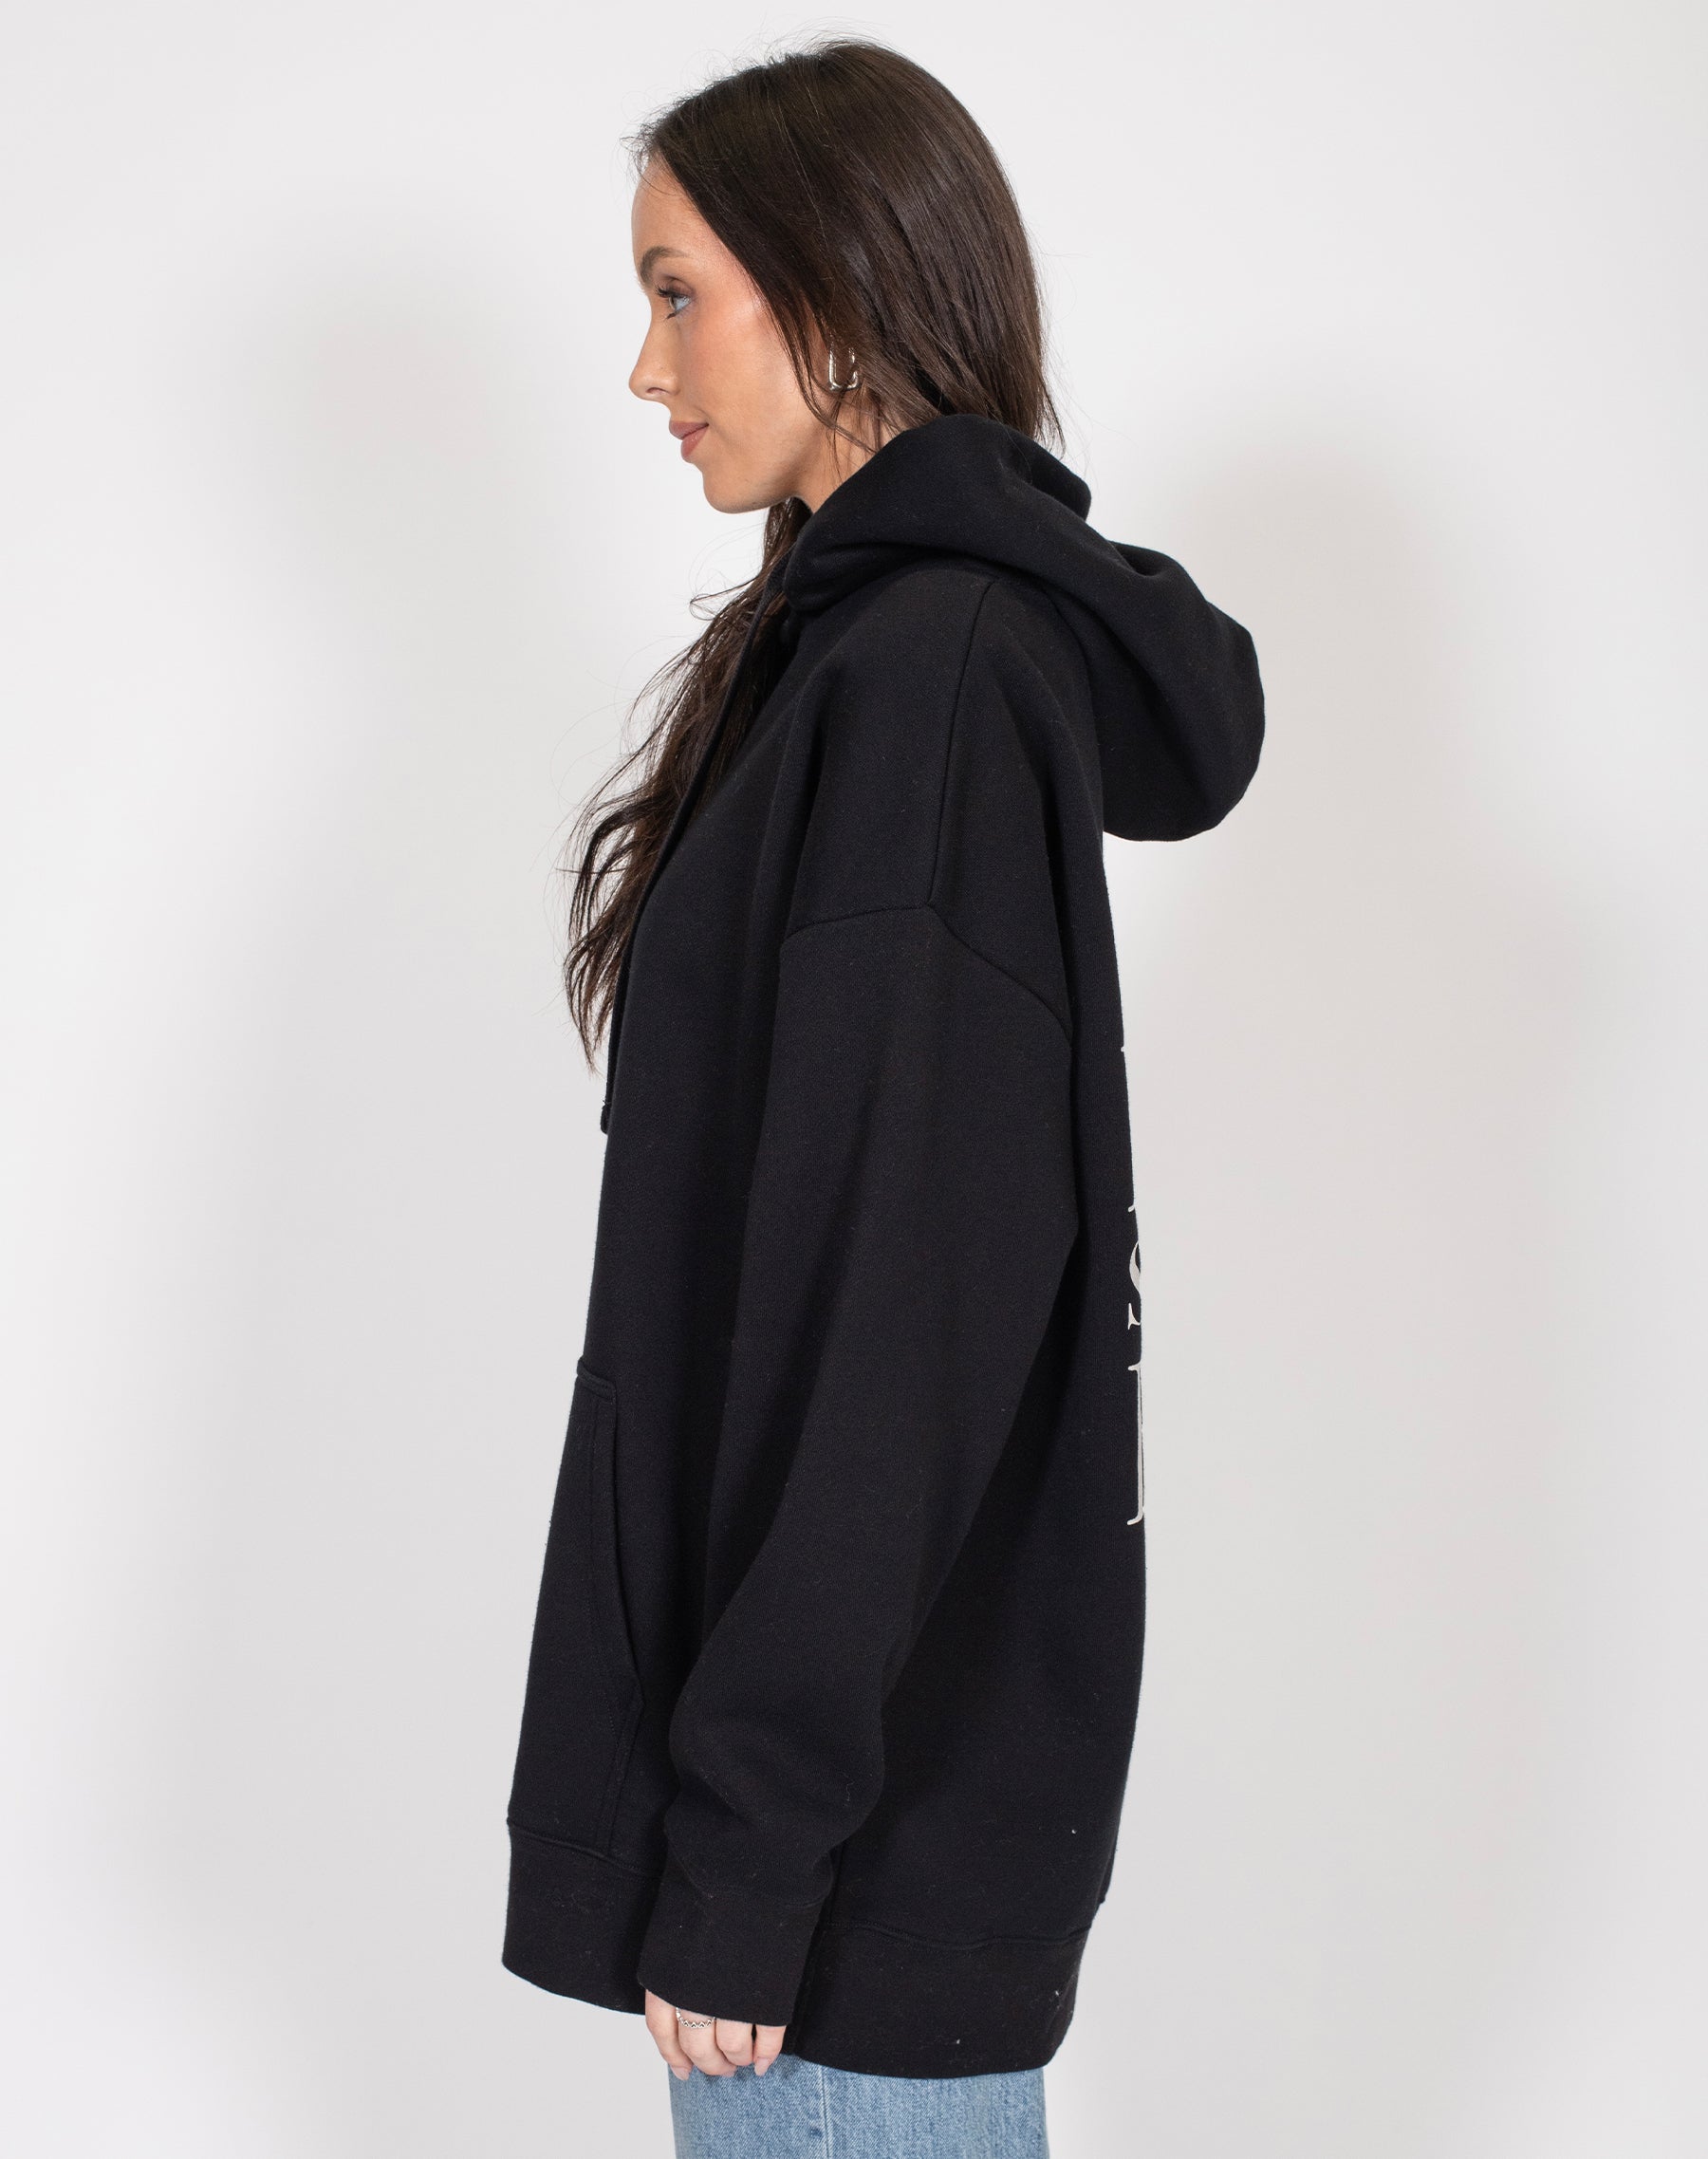 The "BABES SUPPORTING BABES" Big Sister Hoodie | Black